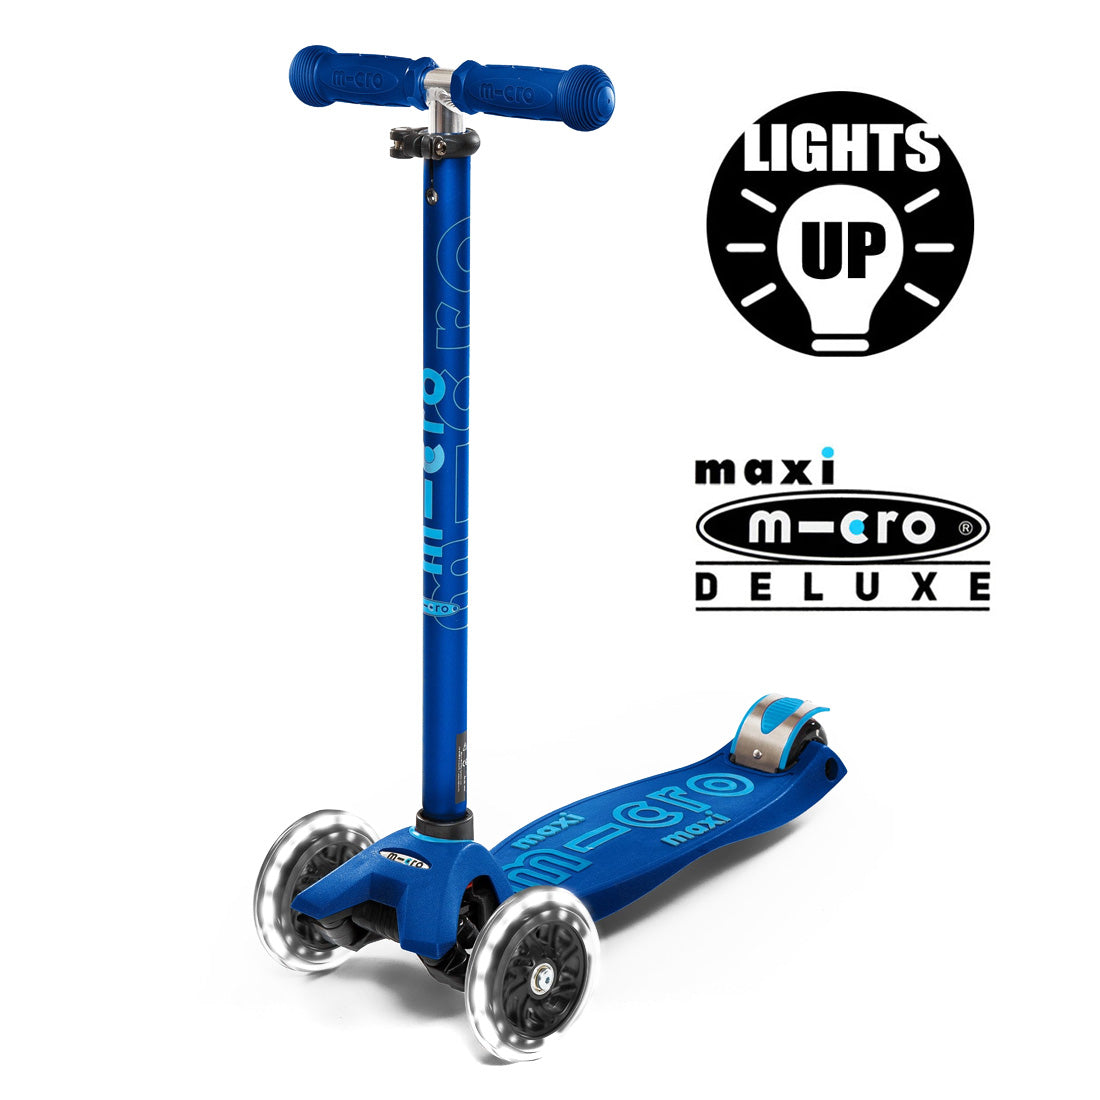 Micro Maxi Deluxe LED Scooter - Blue Scooter Completes Rec